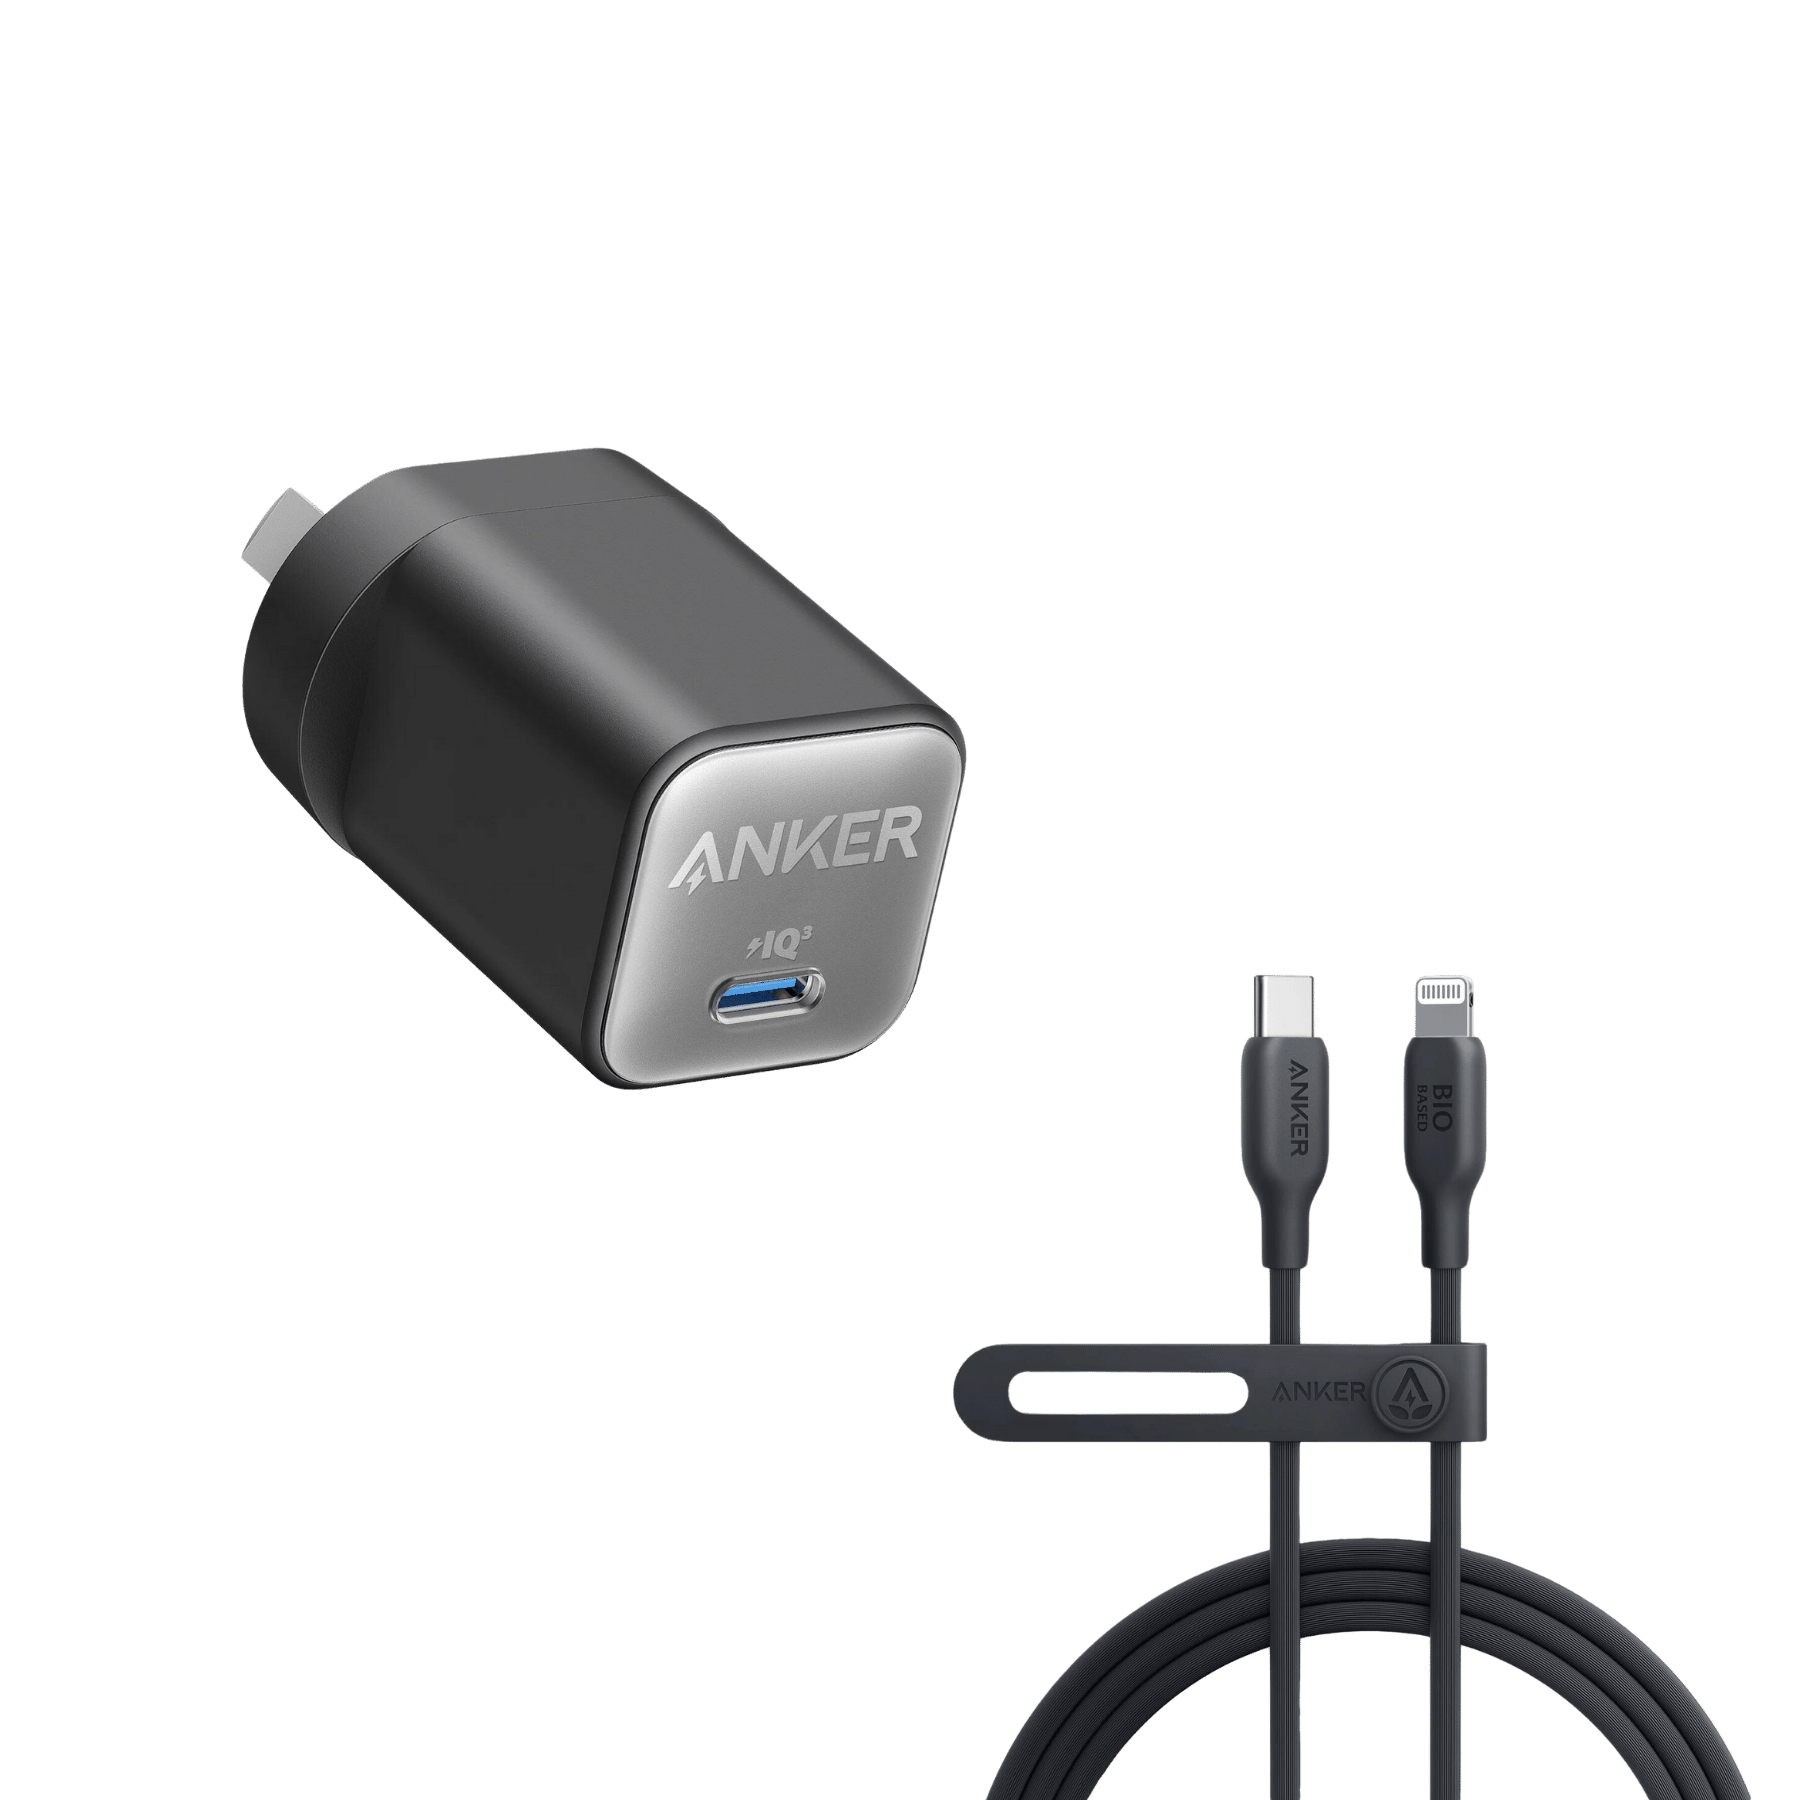 Anker 511 Charger (Nano 3, 30W) and Anker 541 USB-C to Lightning Cable (Bio-Based)